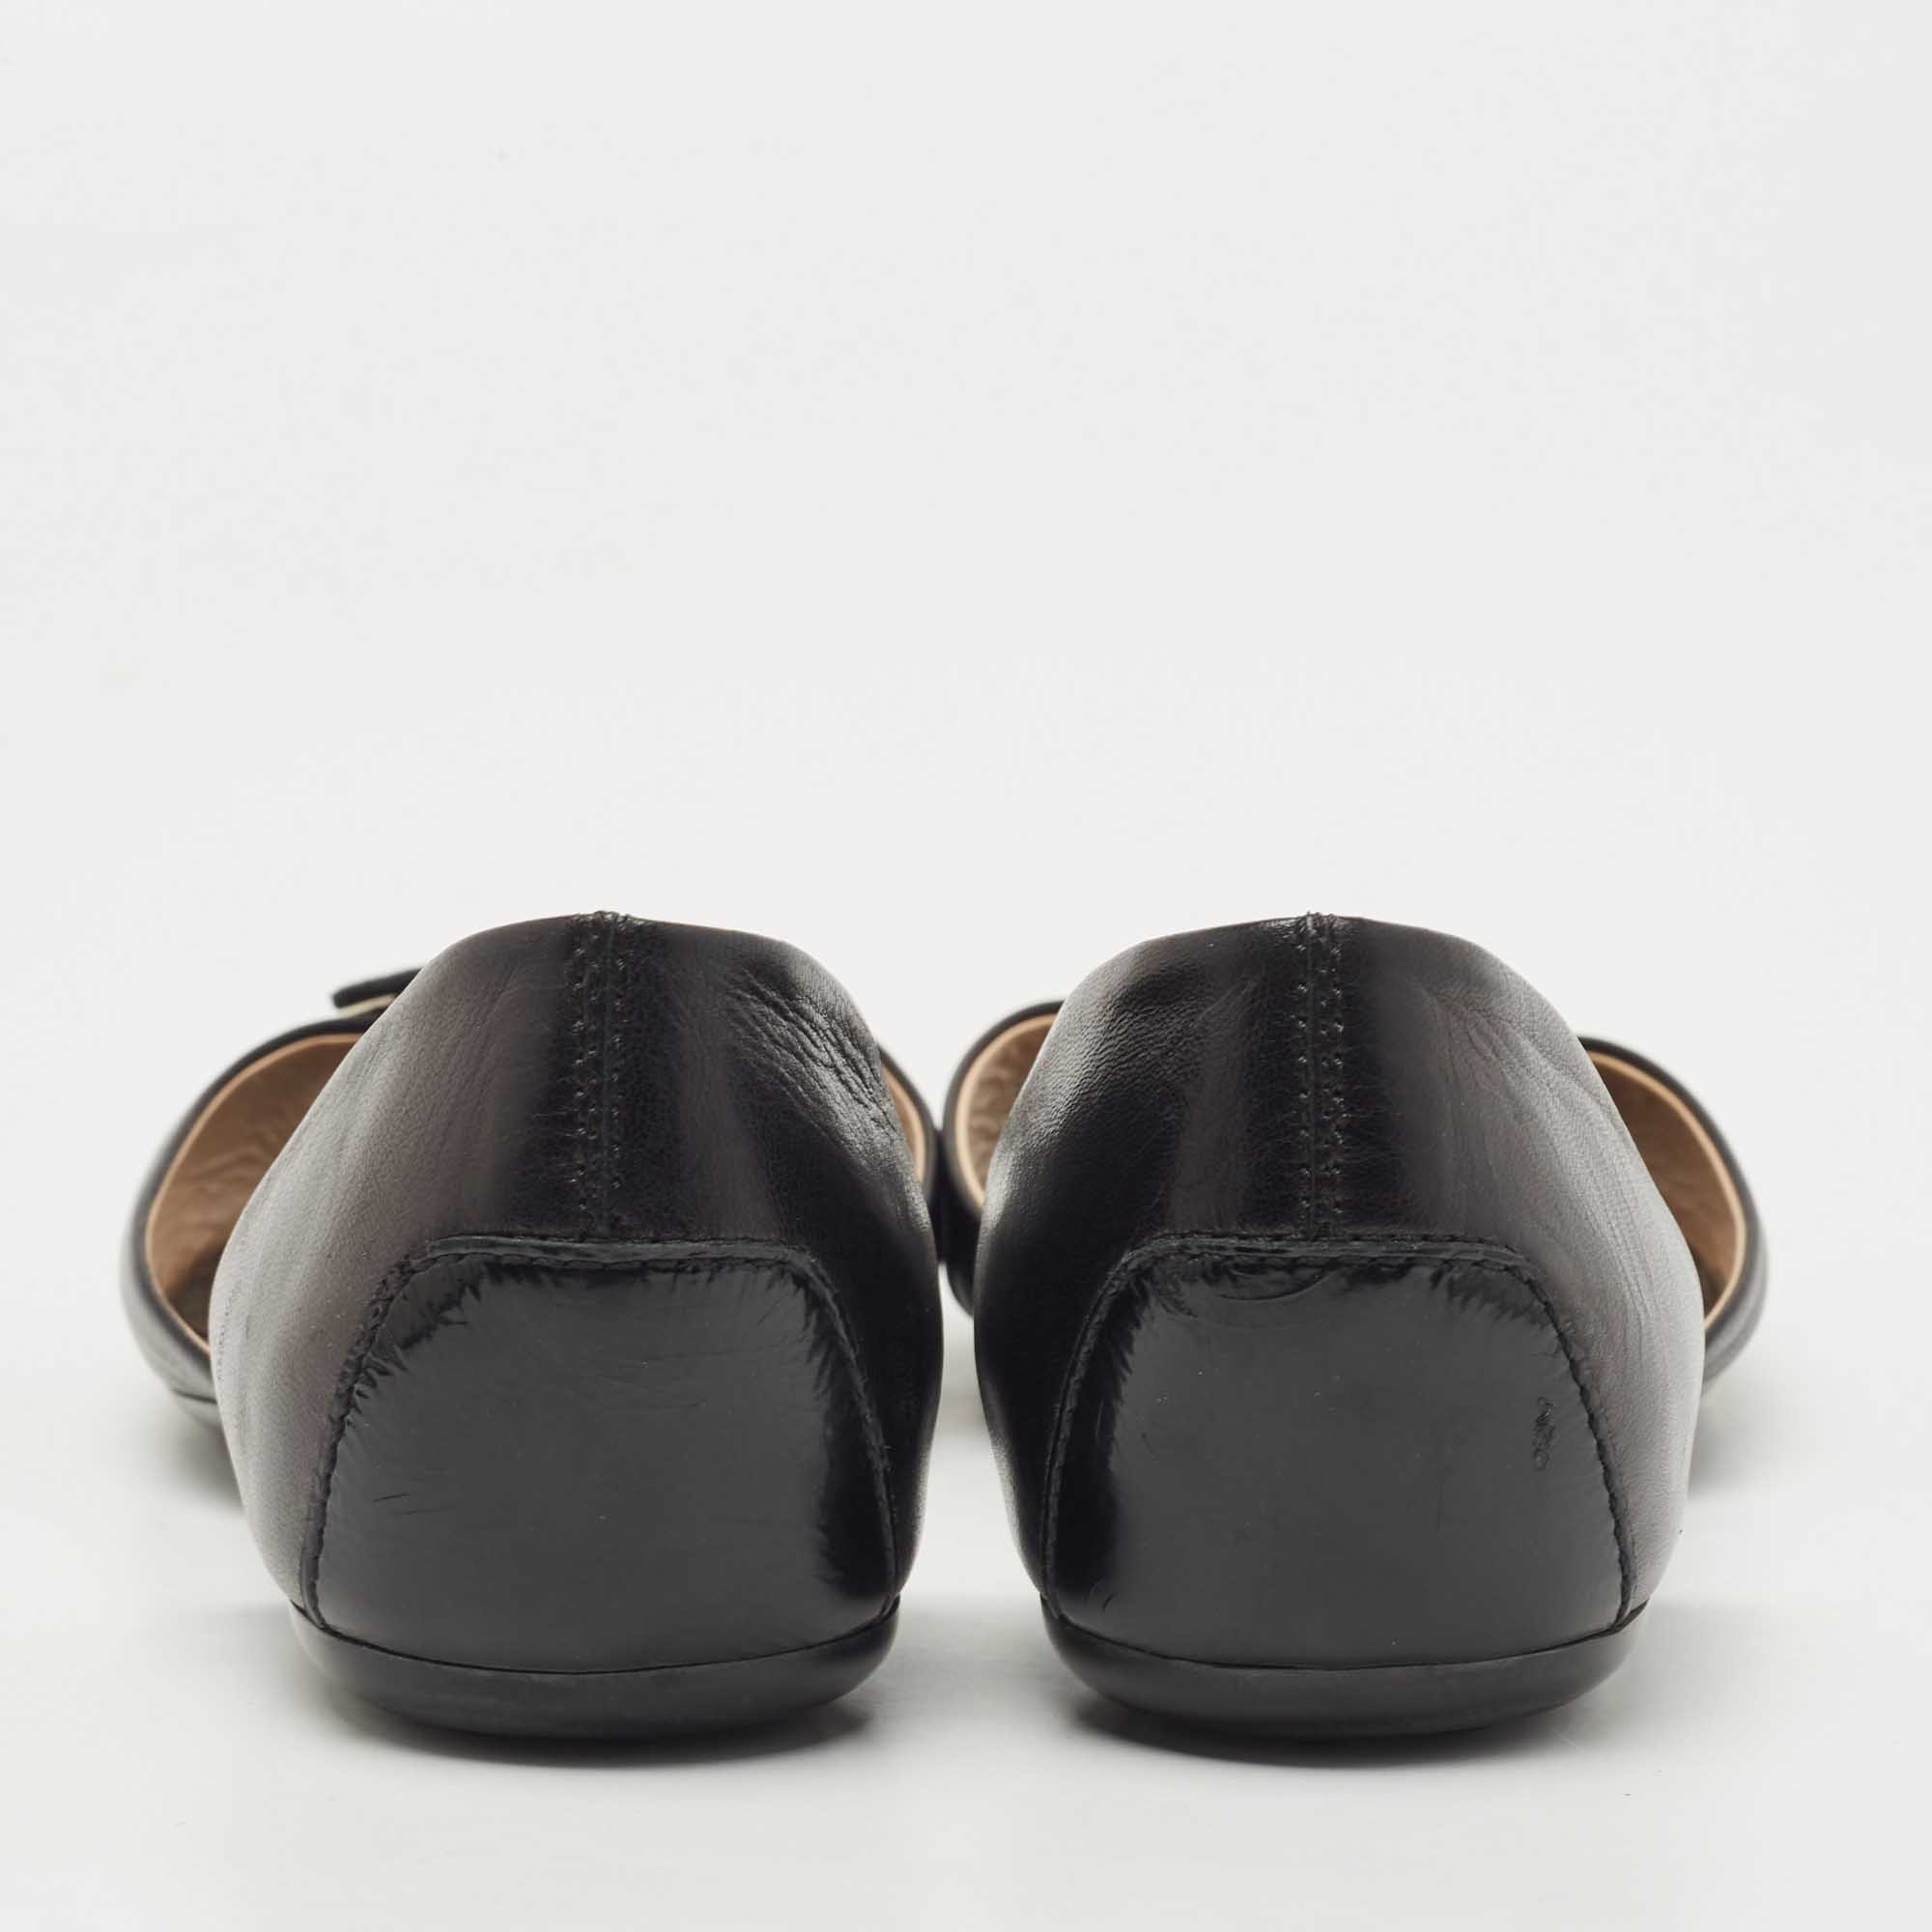 Tod's Black Leather Peep Toe D'orsay Flats Size 36